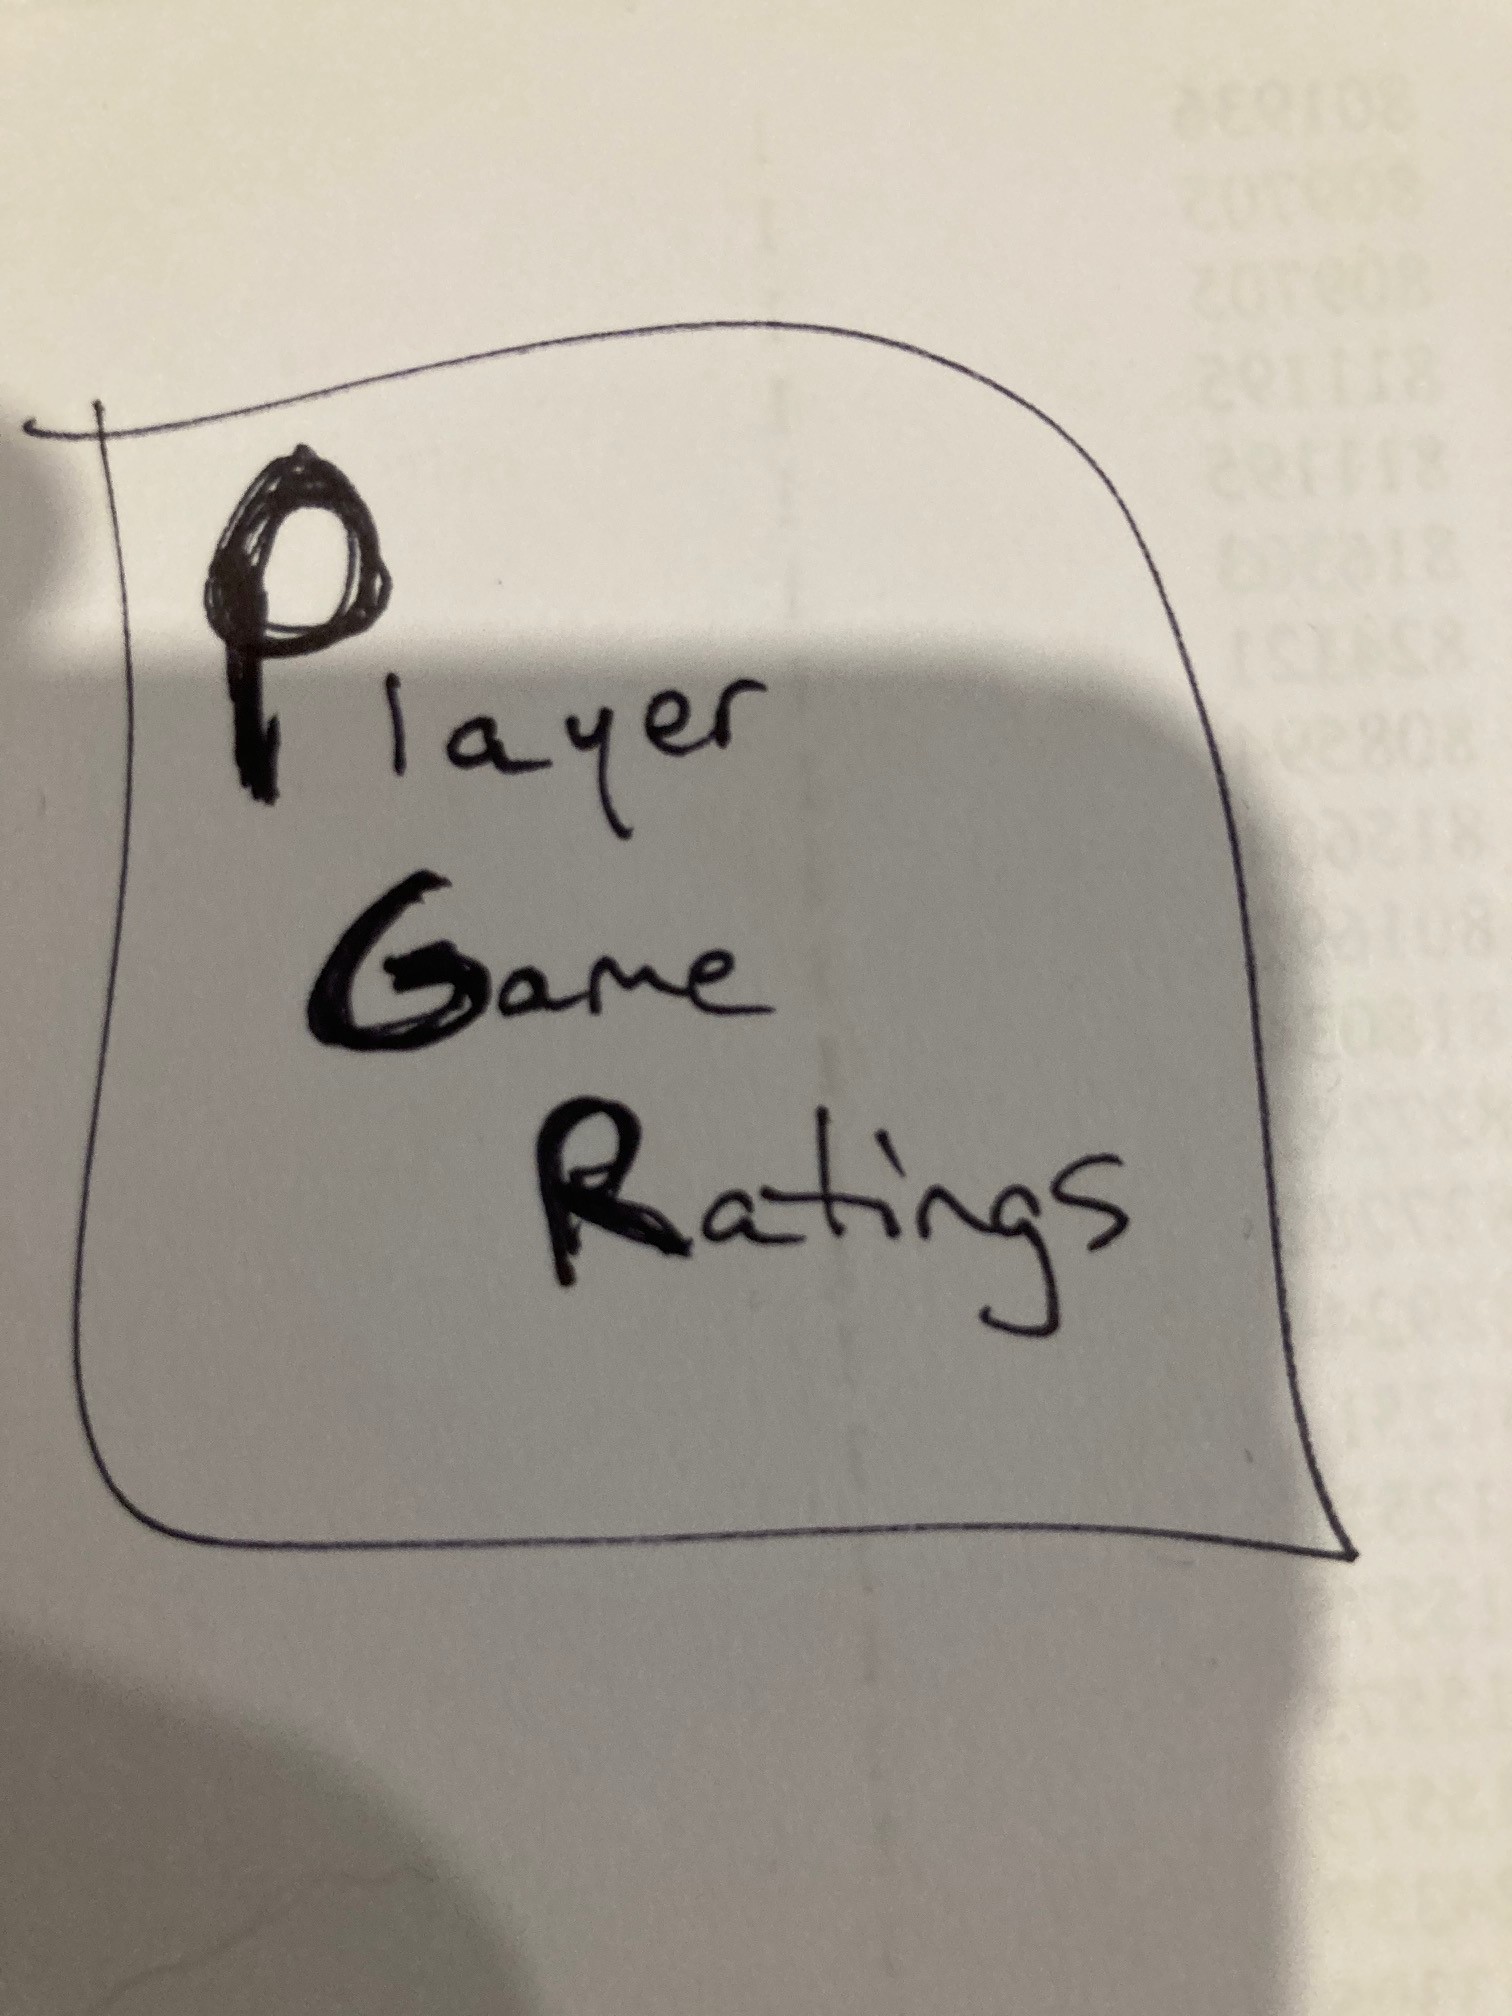 What are Player Game Ratings and what use do they have?